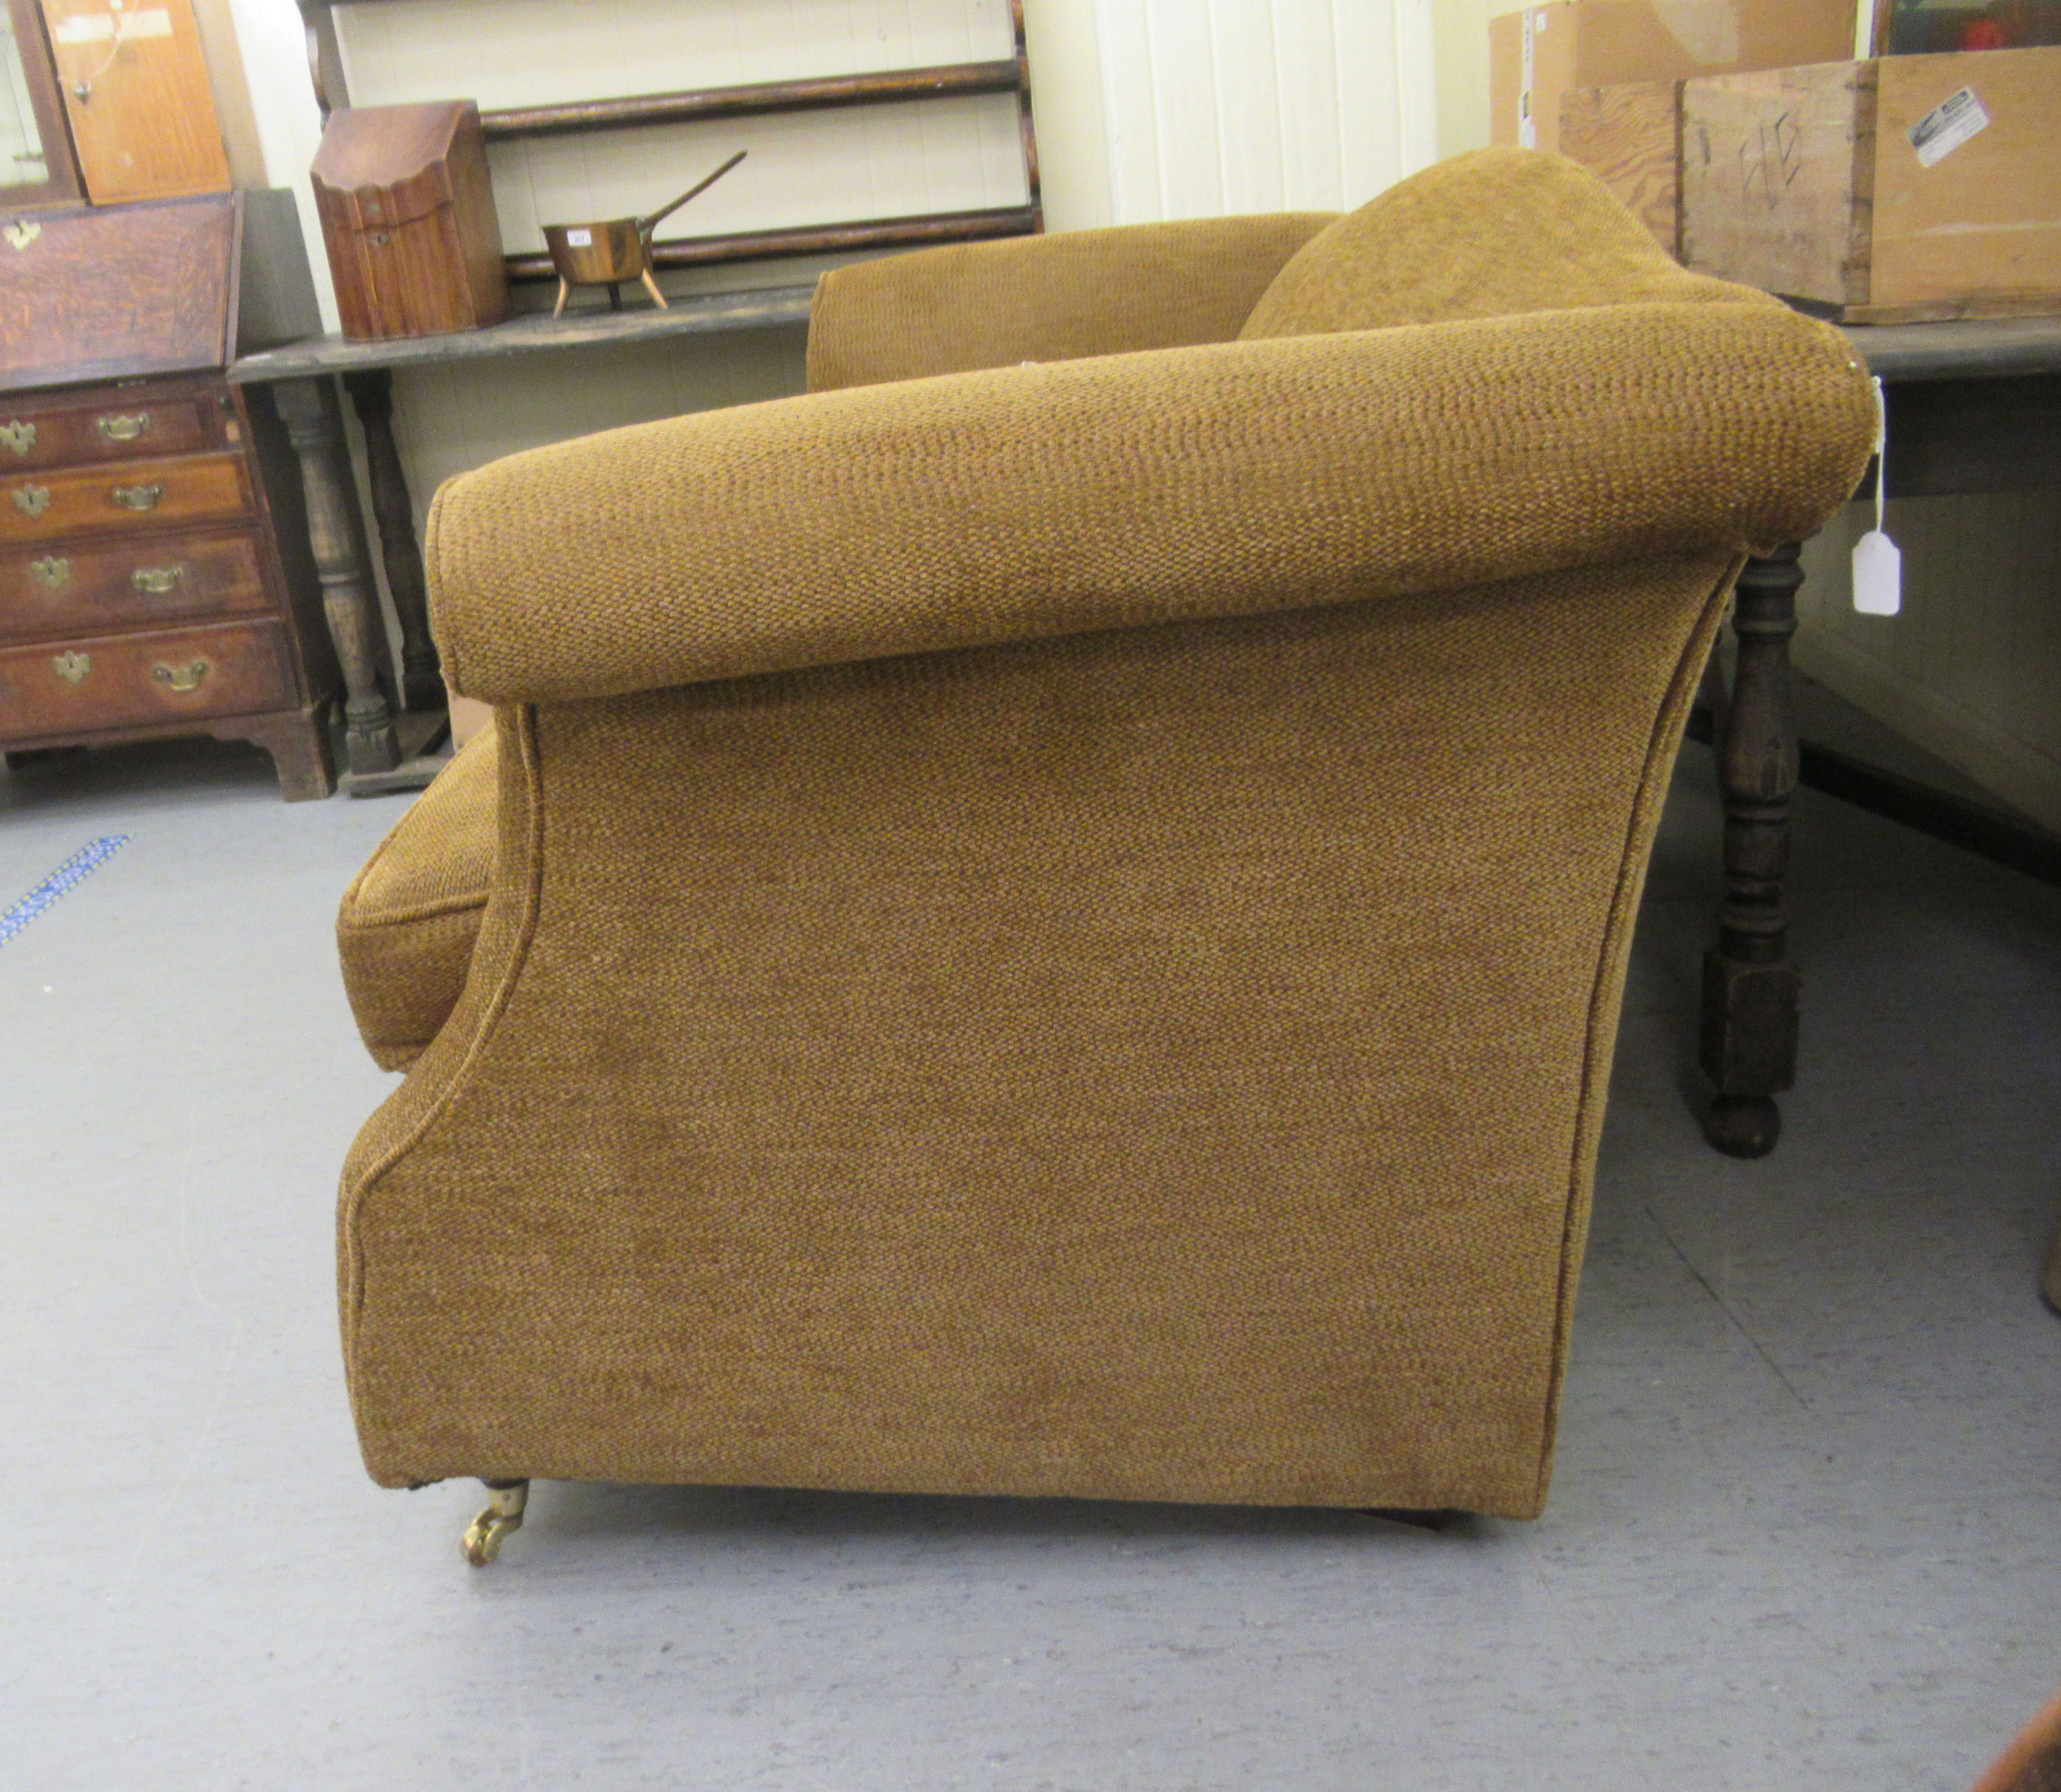 A modern textured fabric upholstered two person settee with an arched back and level arms, raised on - Image 2 of 2